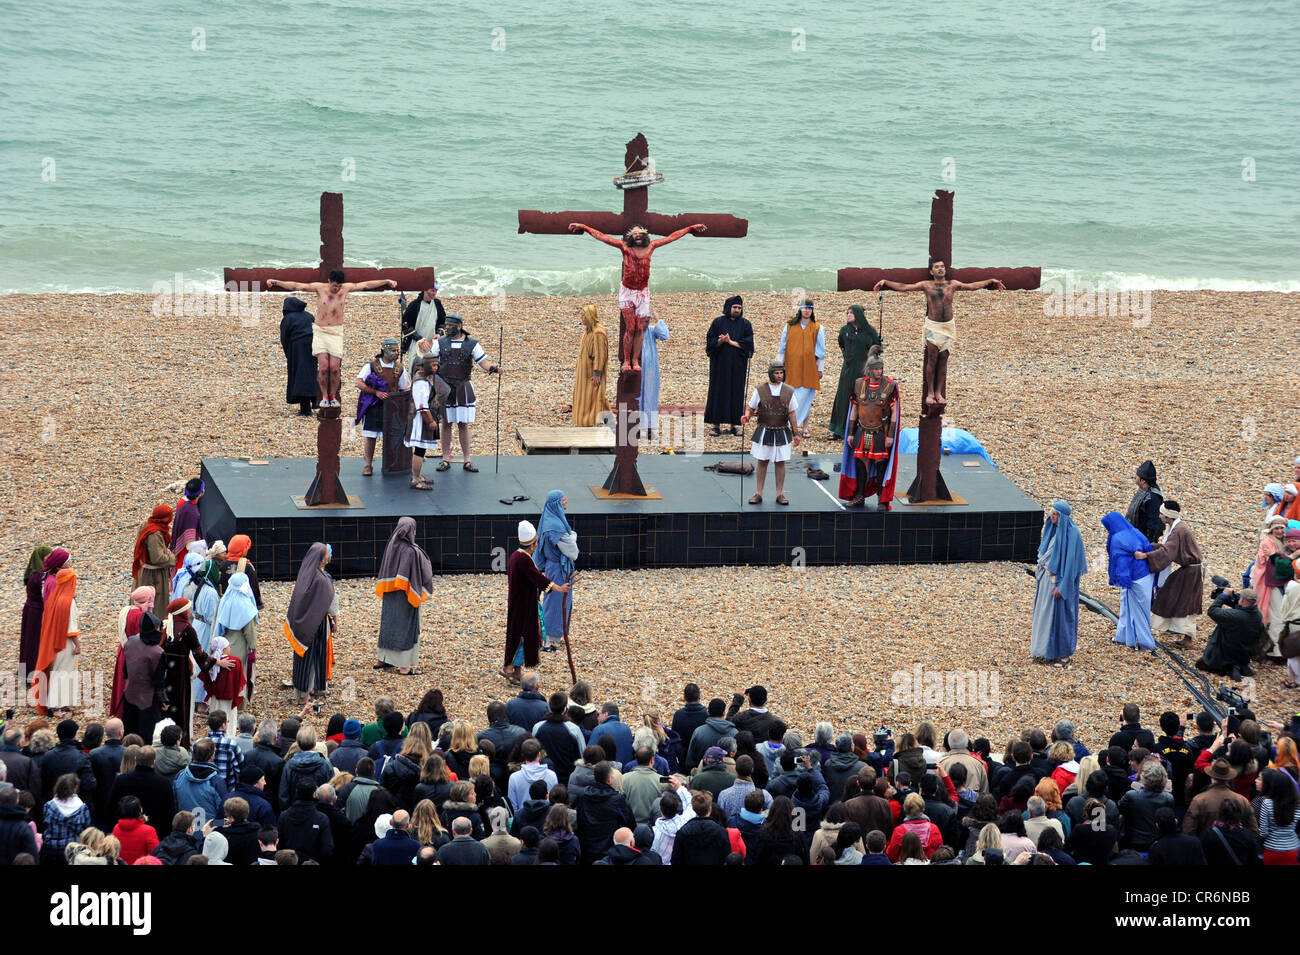 Outdoor theatre production of the “Passion of Christ, the Easter Story” on Brighton beach, Stock Photo